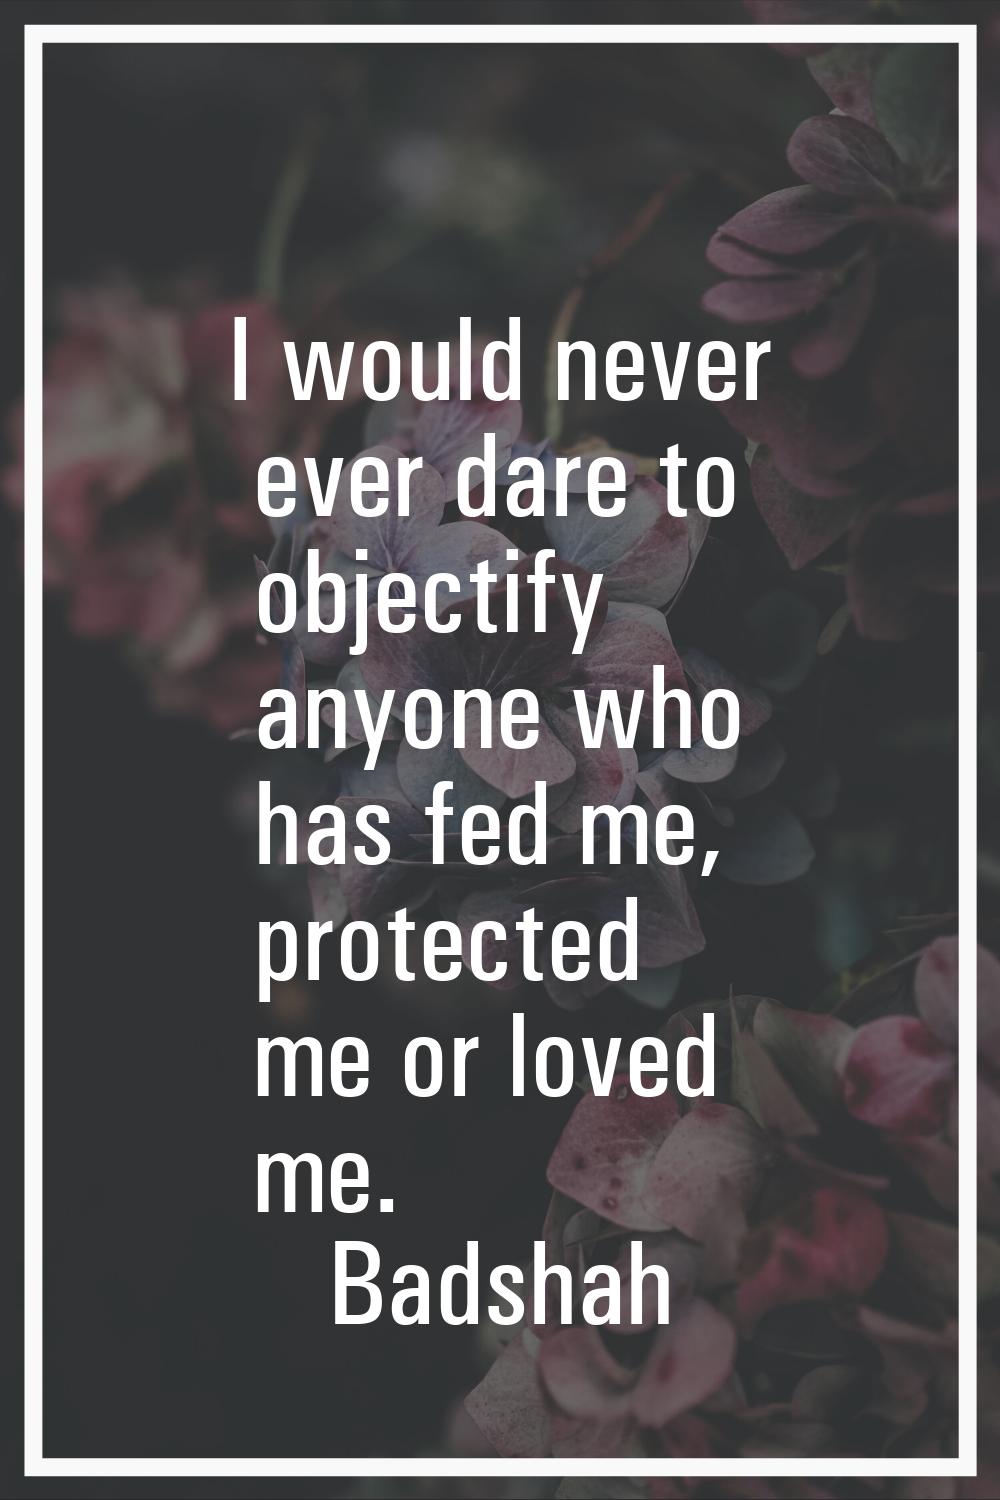 I would never ever dare to objectify anyone who has fed me, protected me or loved me.